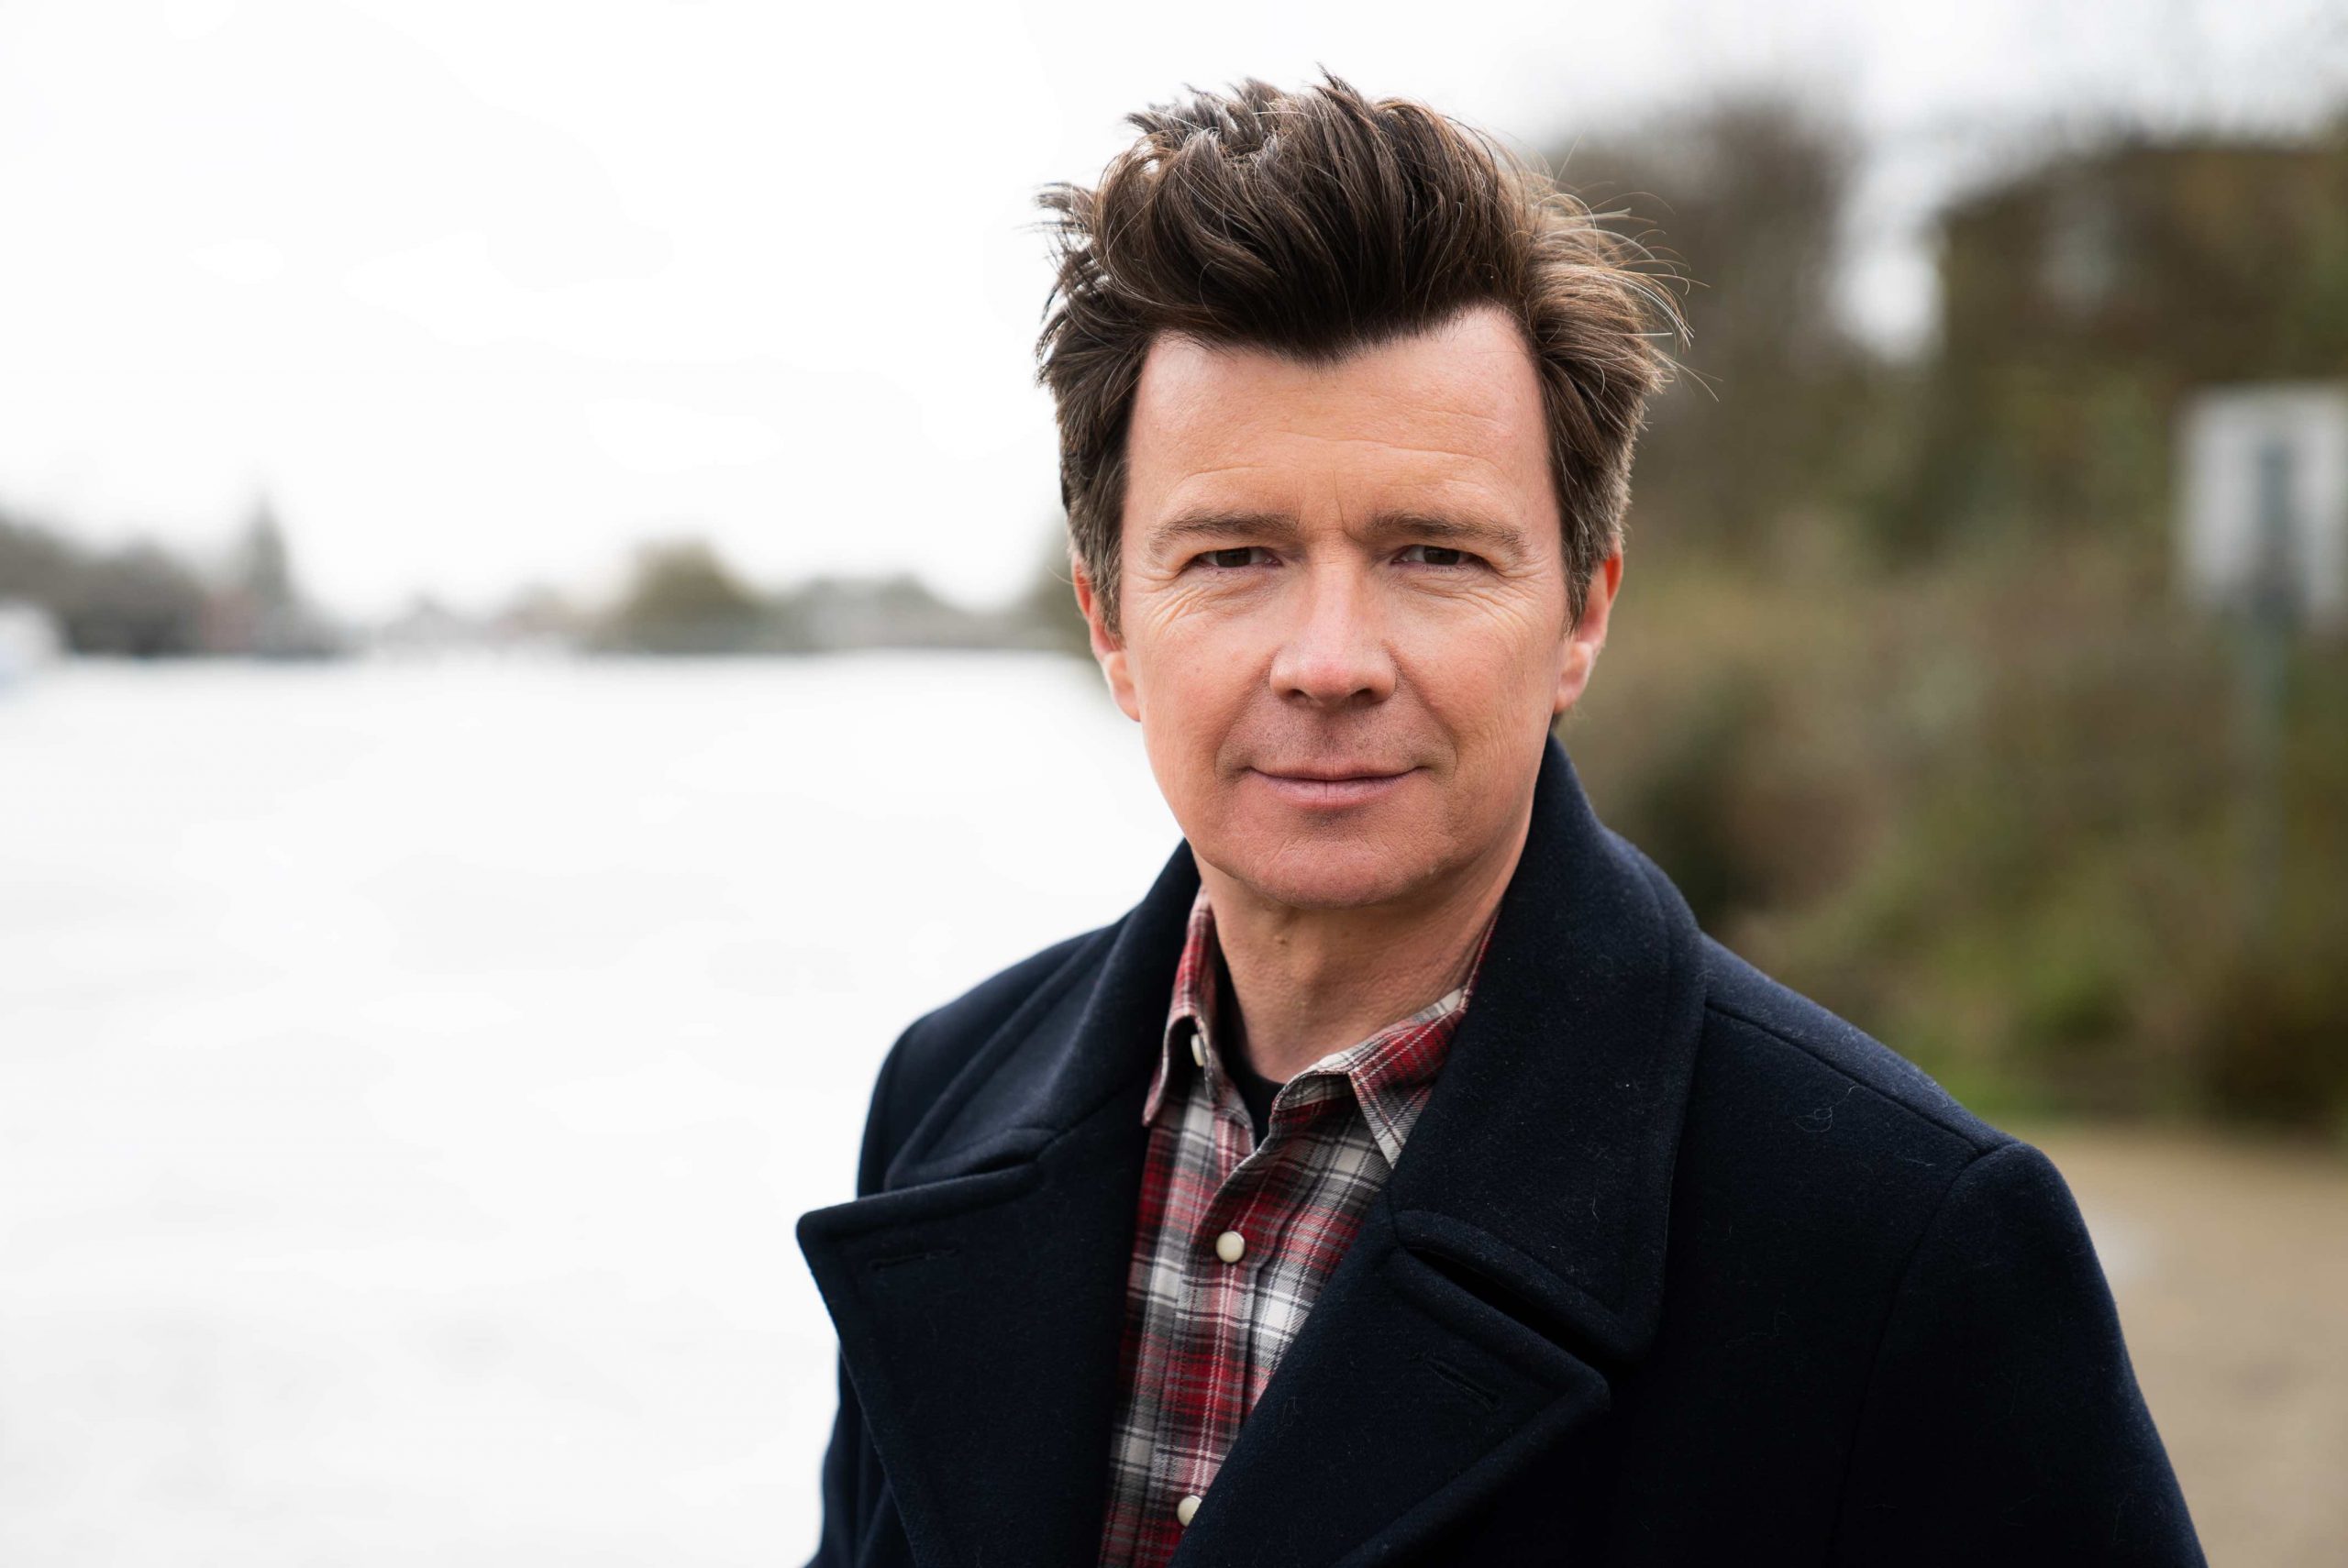 Rick Astley announces free concert for NHS frontline staff.